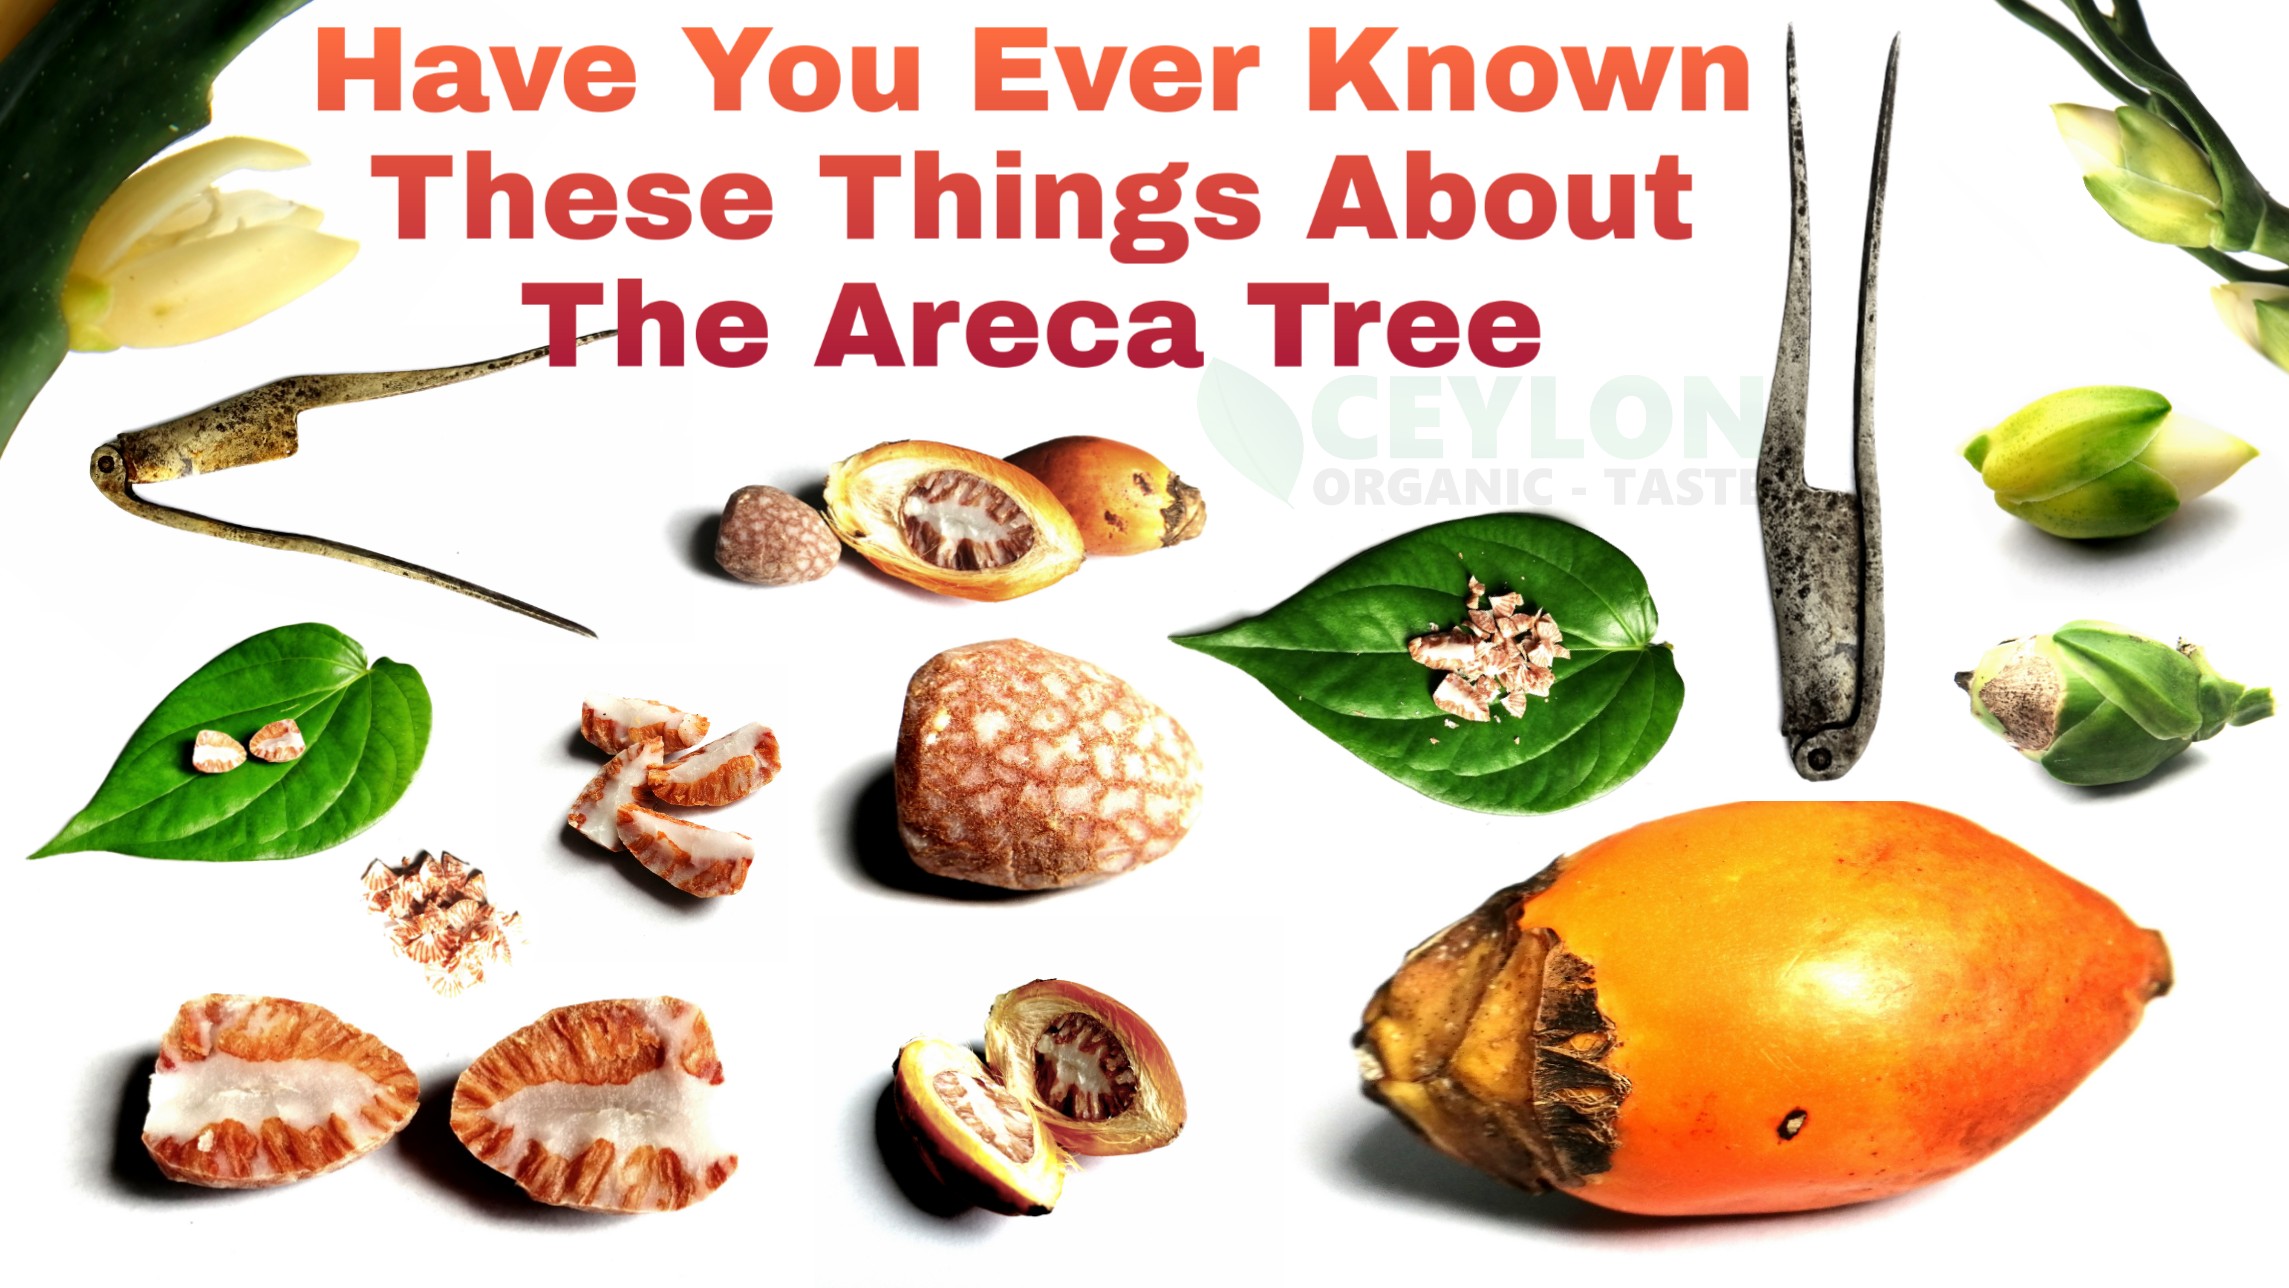 Have you ever known these things about the Areca Tree